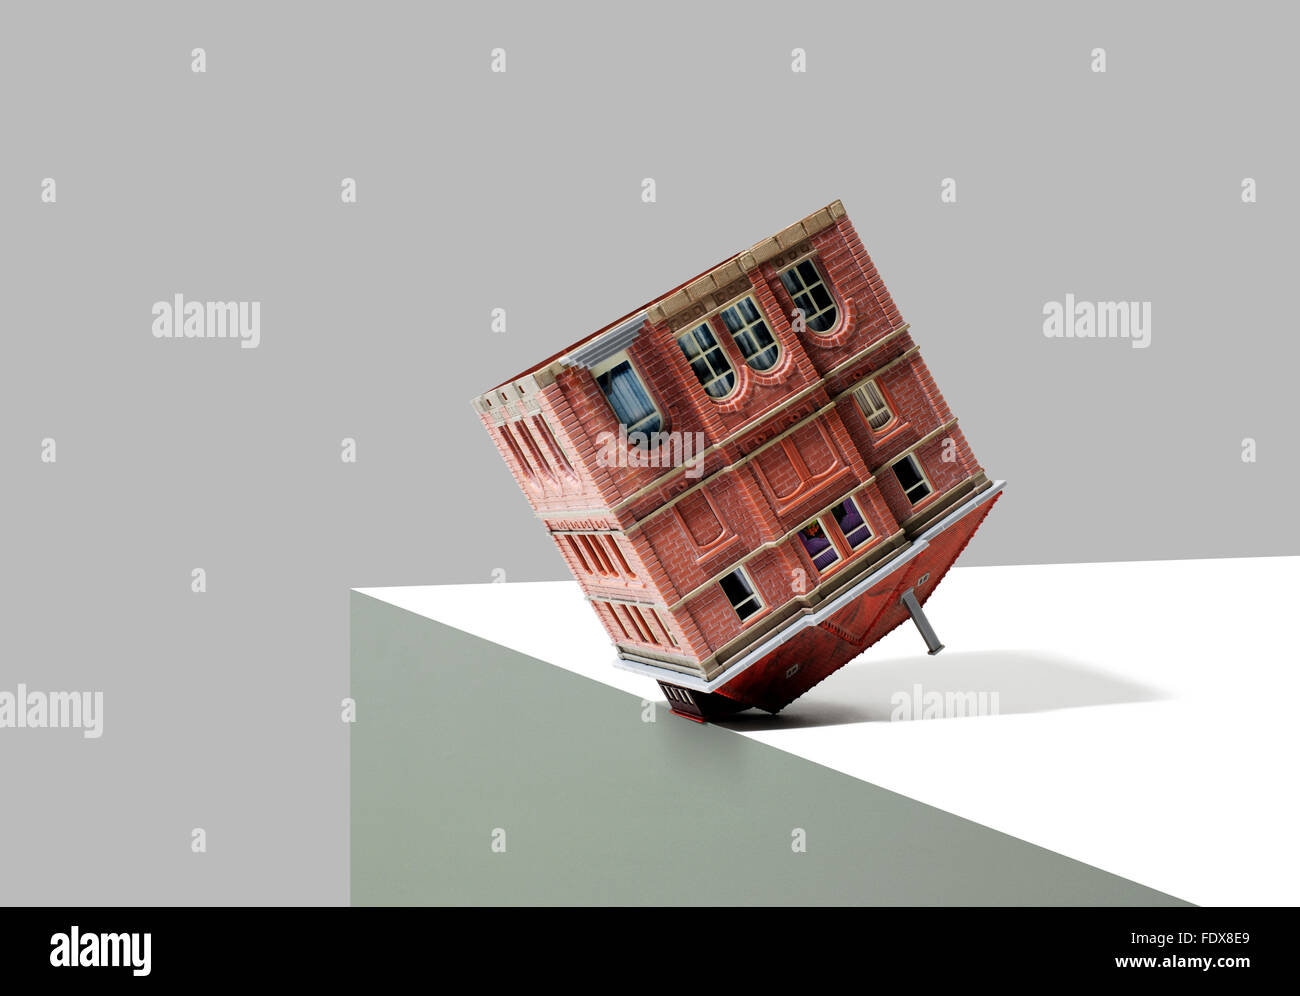 Studio shot of a model building or house upside down at the edge of cliff Stock Photo